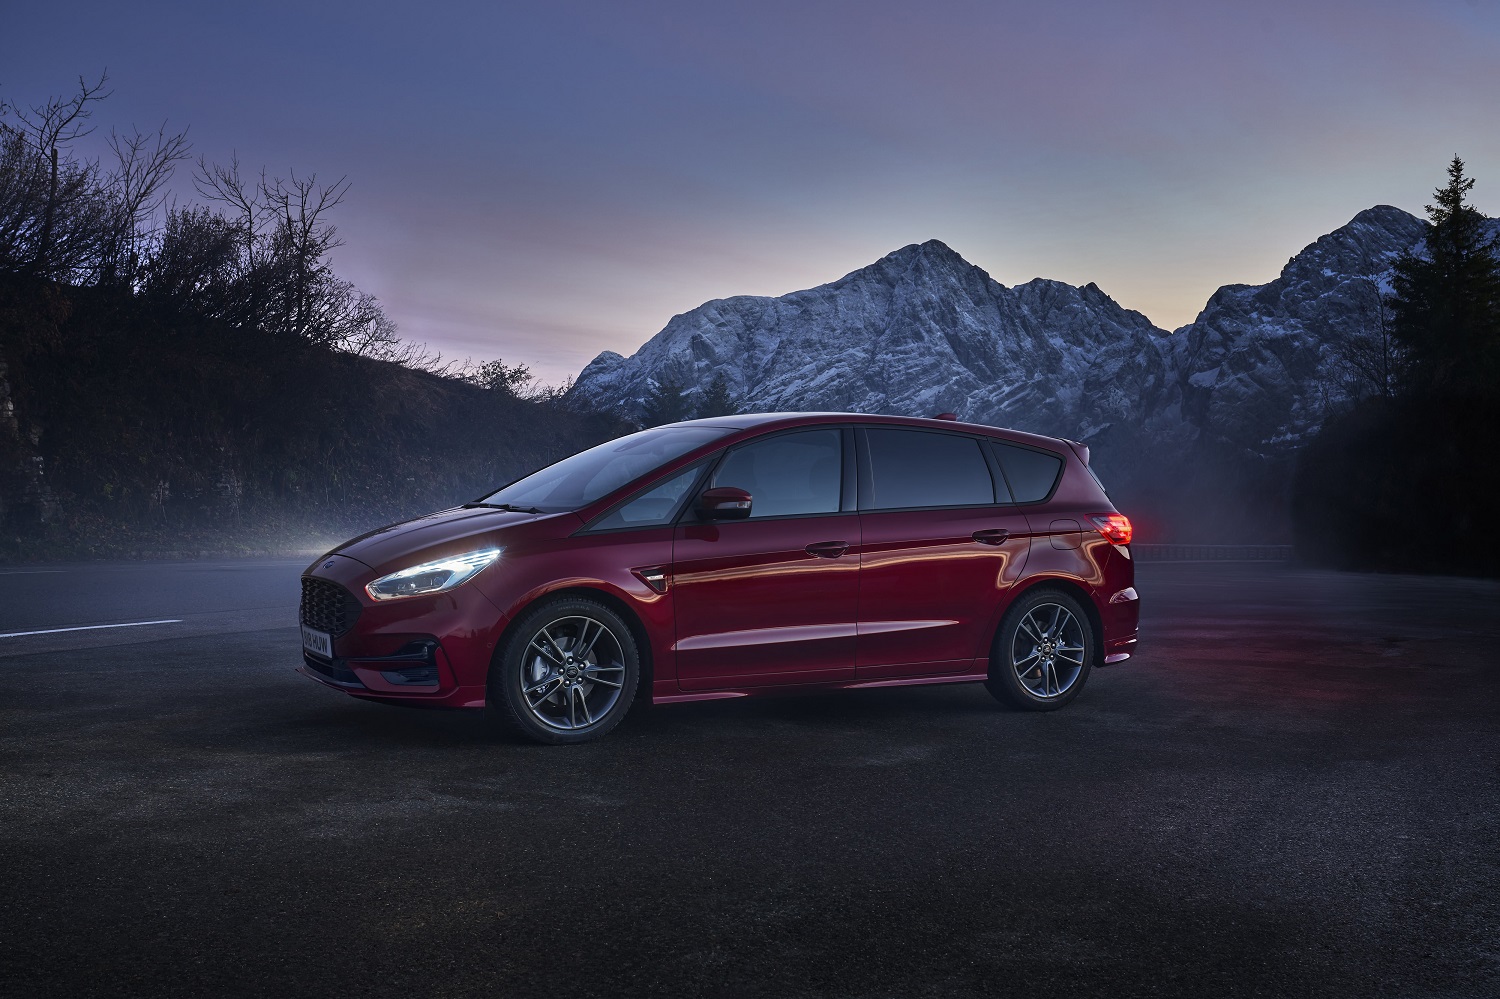 https://fordauthority.com/wp-content/uploads/2021/02/2021-Ford-S-MAX-Hybrid-Exterior-001-Front-Three-Quarters.jpg